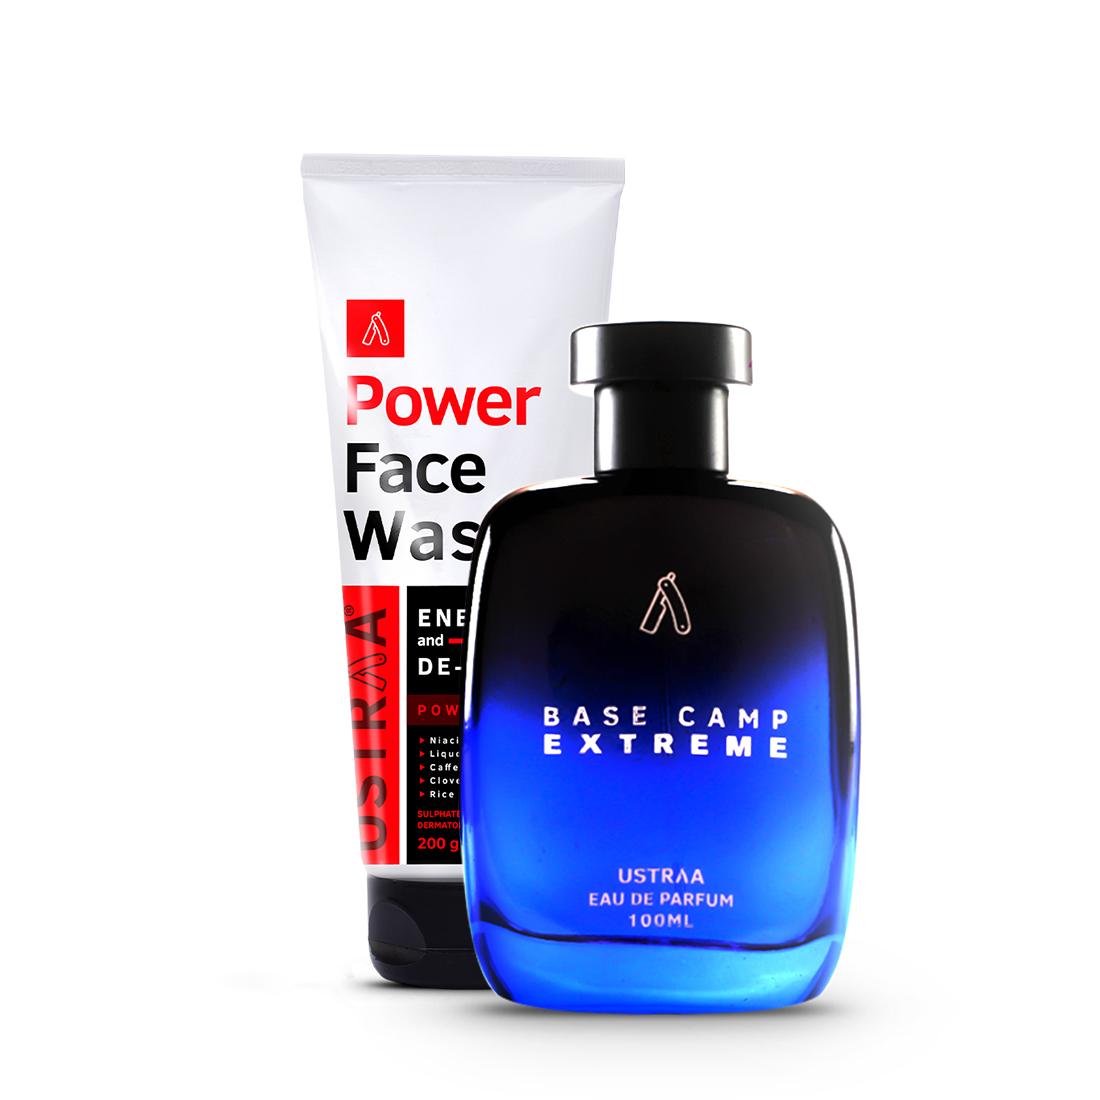  Base Camp Extreme EDP - 100ml & Power Face Wash Energize and De-tan - 200g